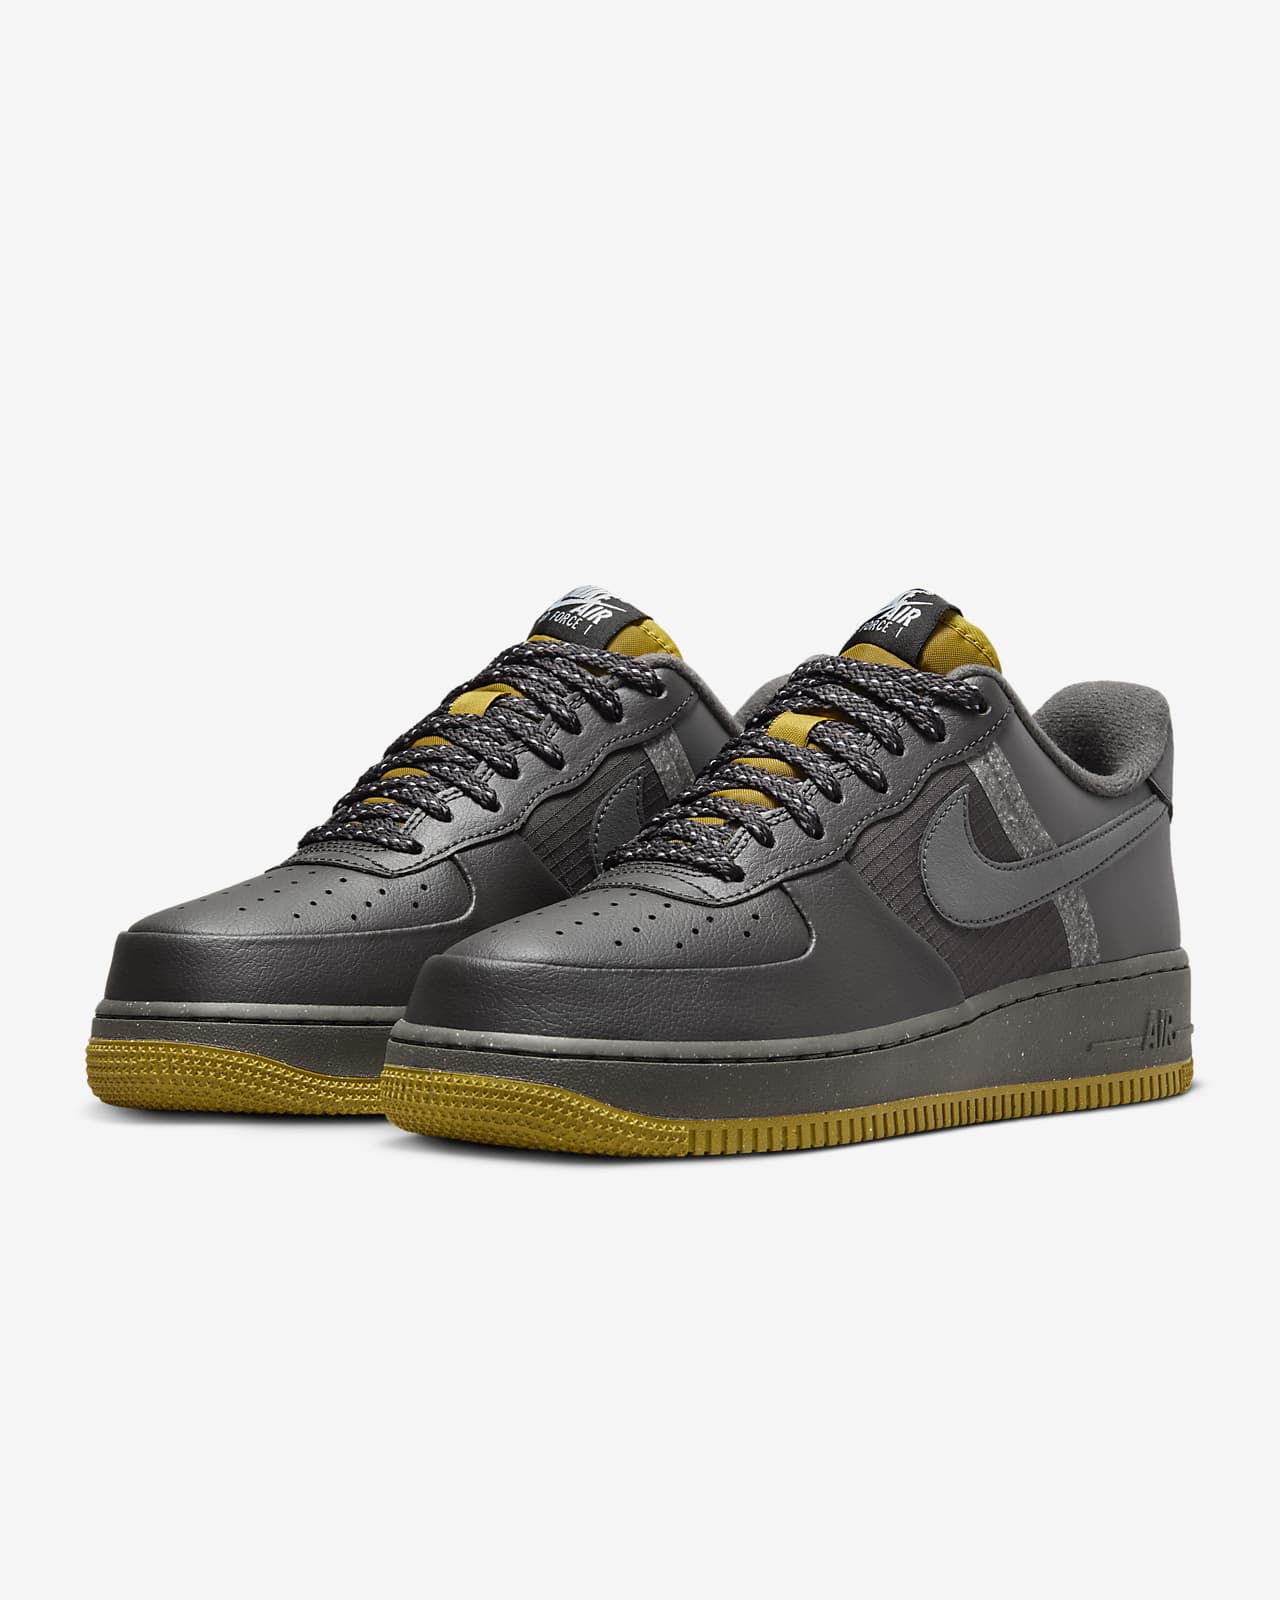 Nike Air Force 1 LV8 Shoes